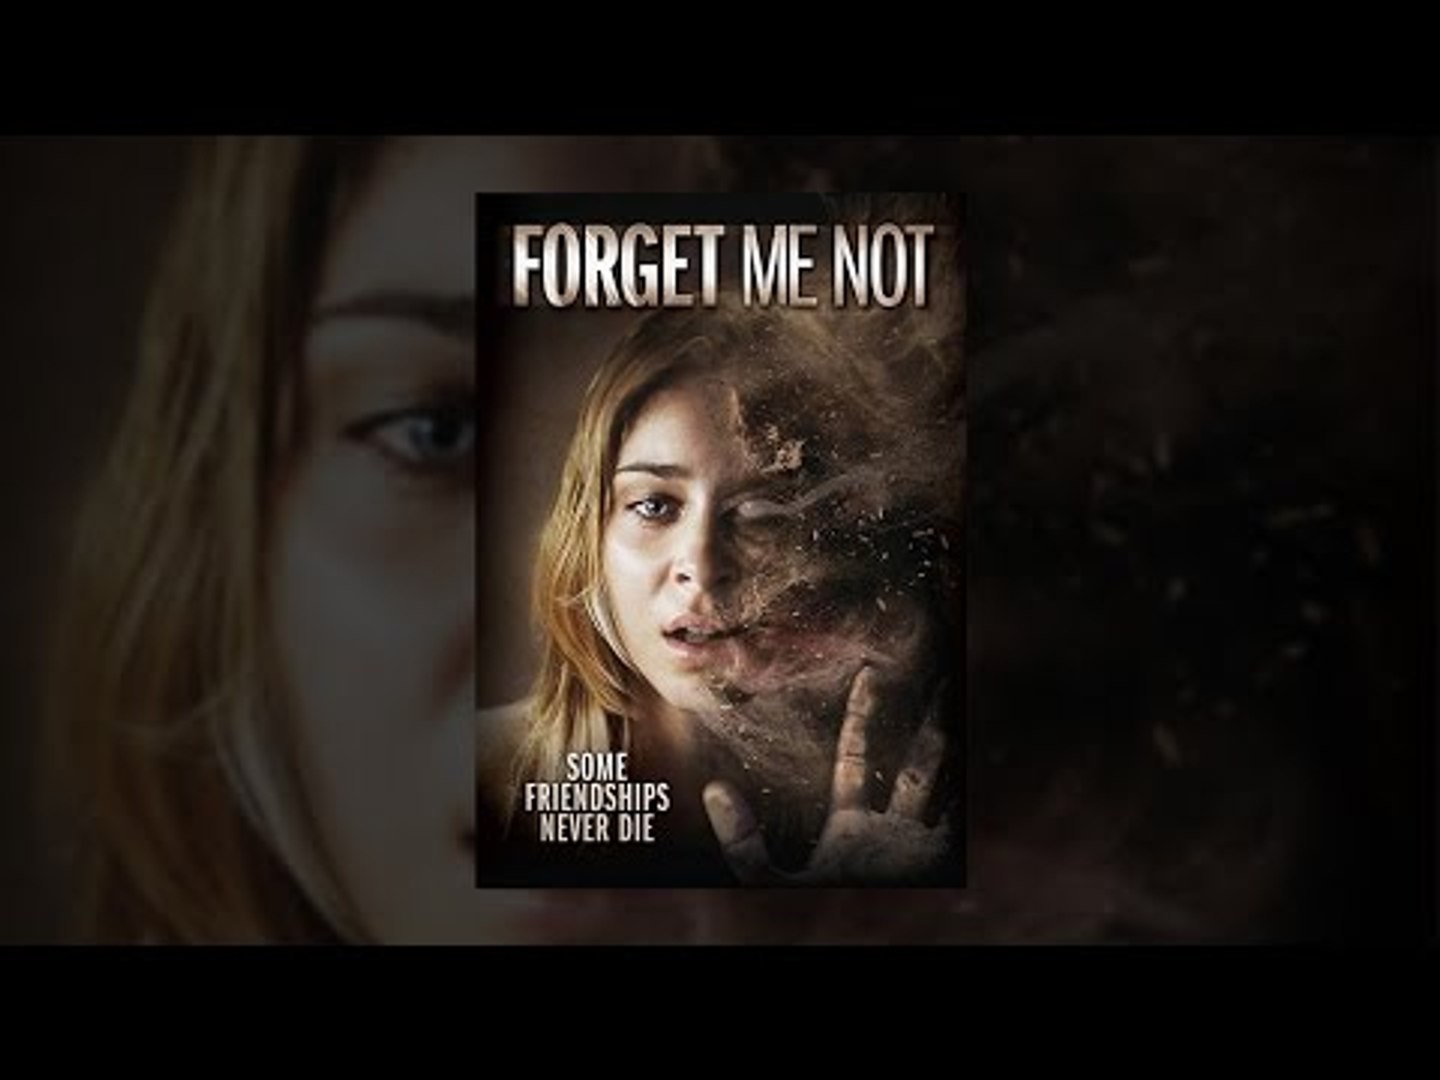 Forget me not movie